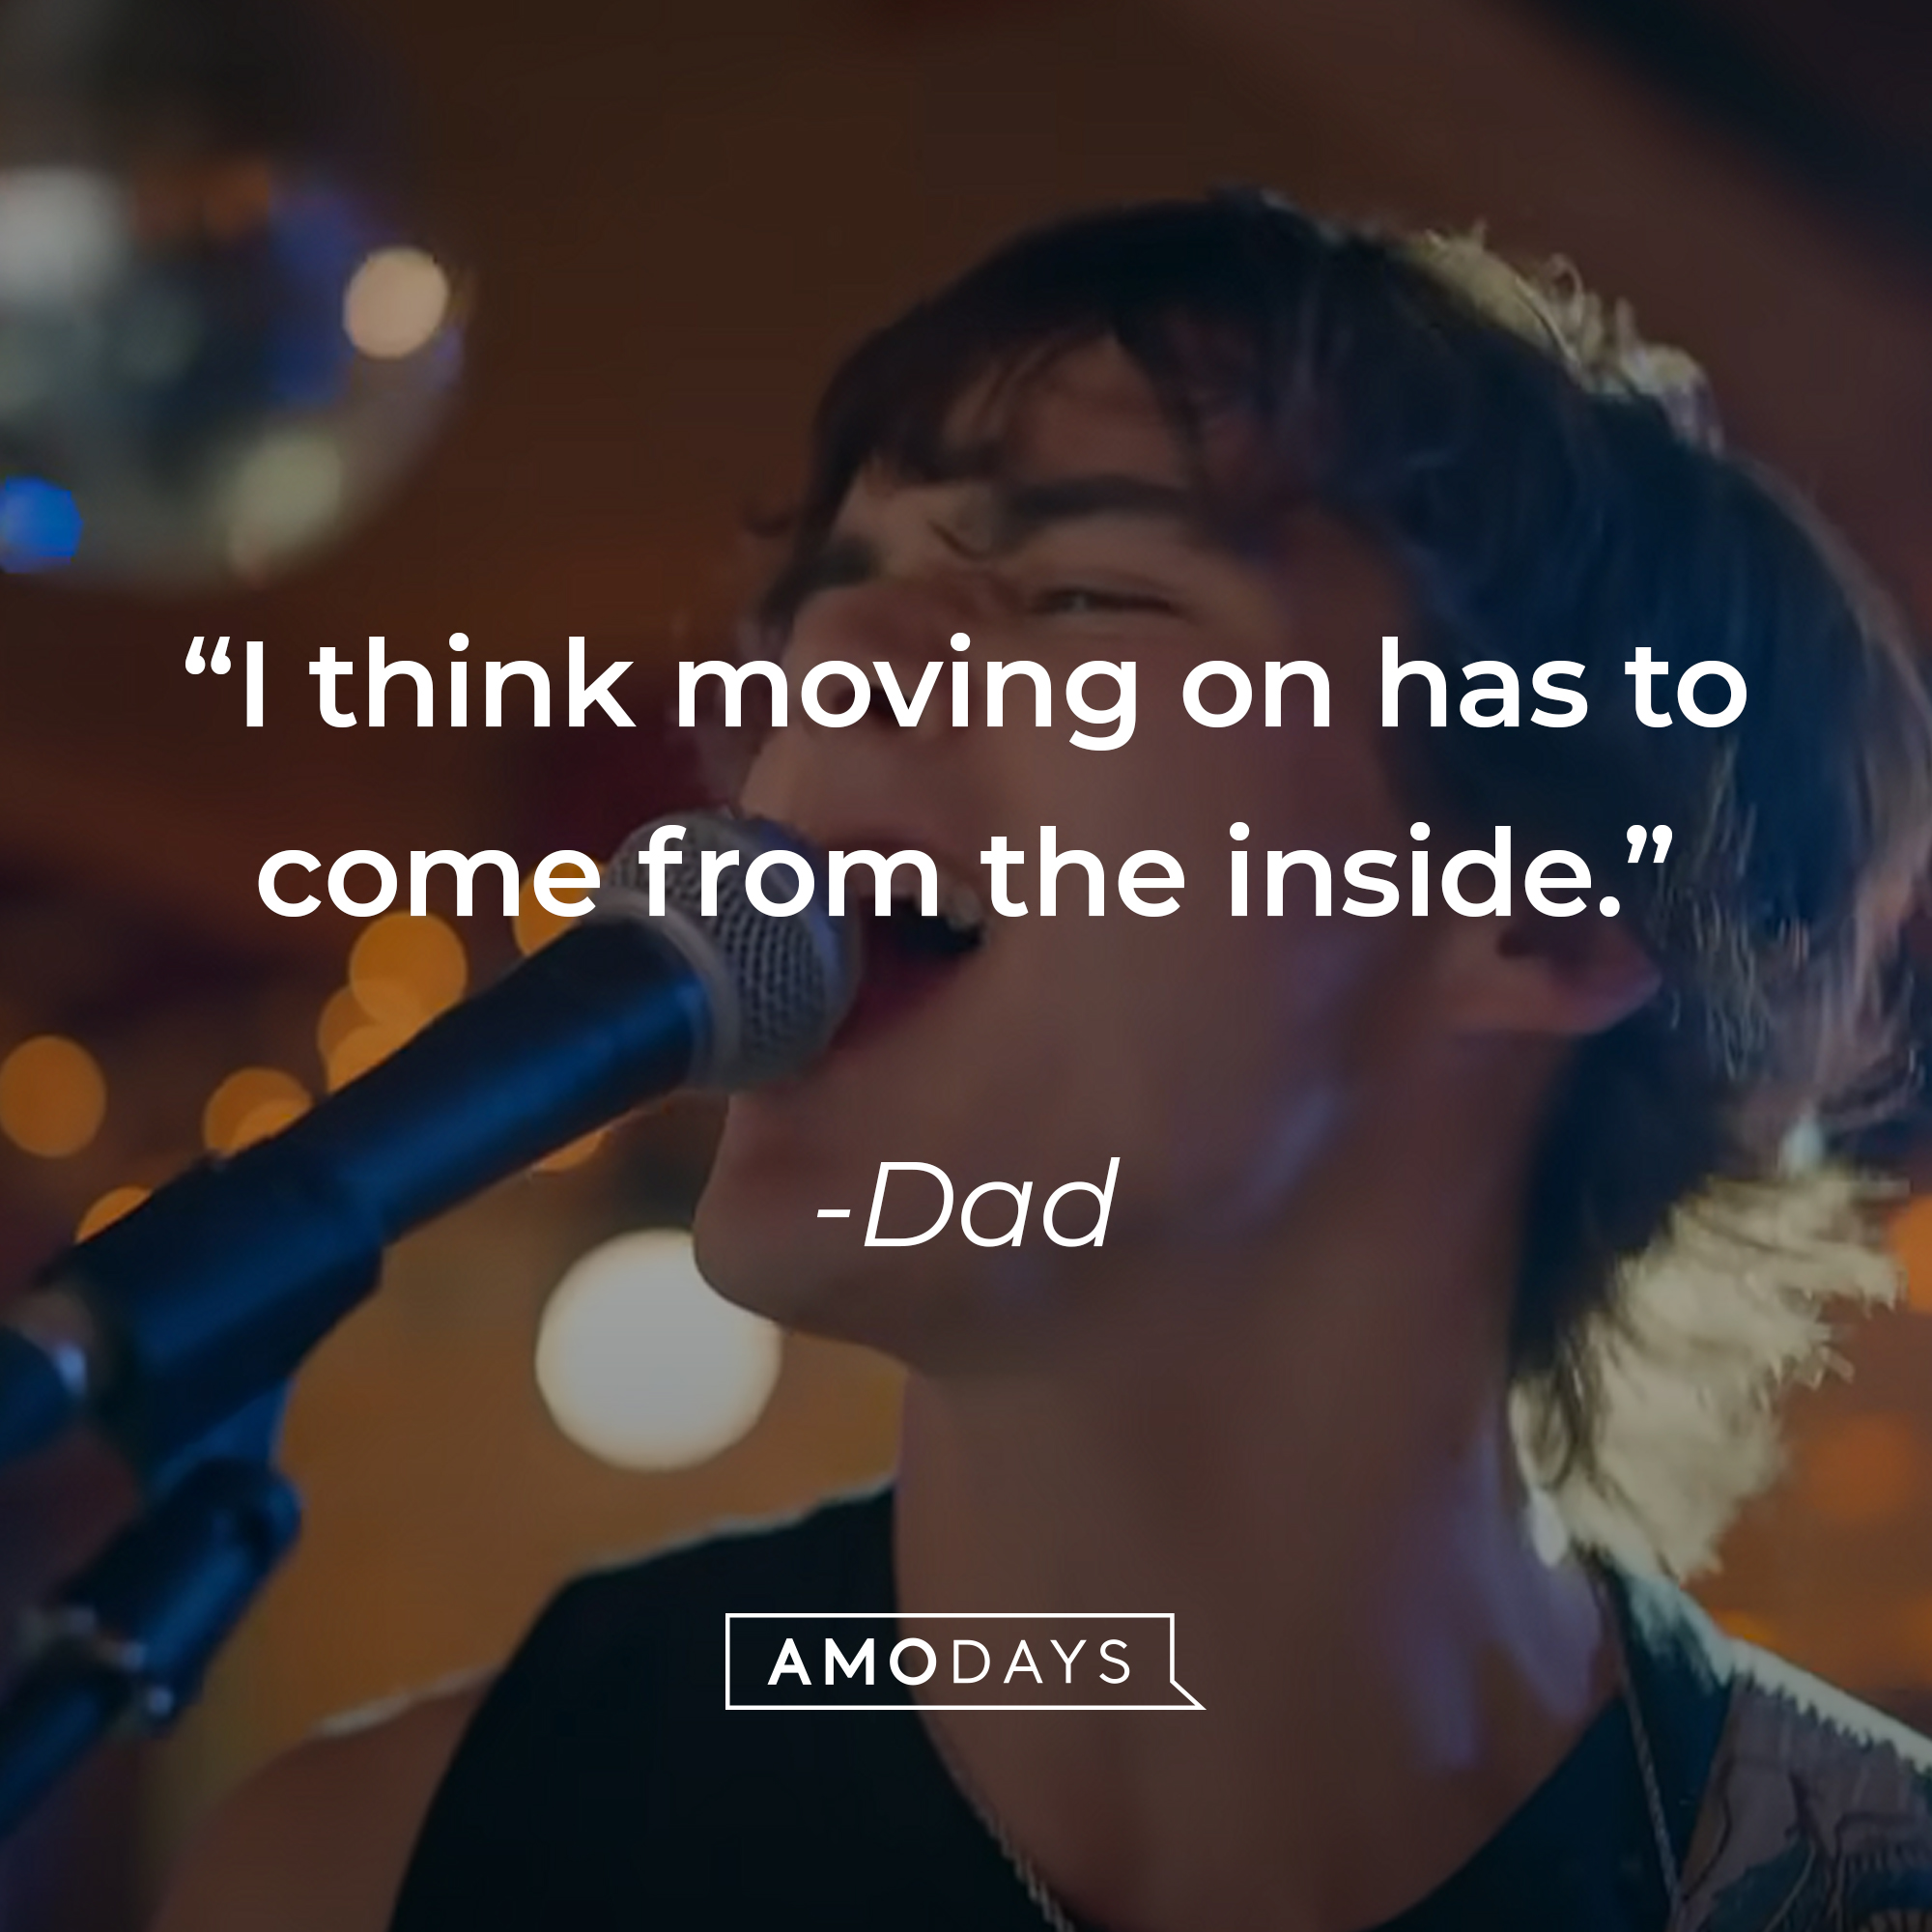 An image of Luke singing with Julia’s dad’s quote: “I think moving on has to come from the inside.” | Source: youtube.com/netflixafterschool